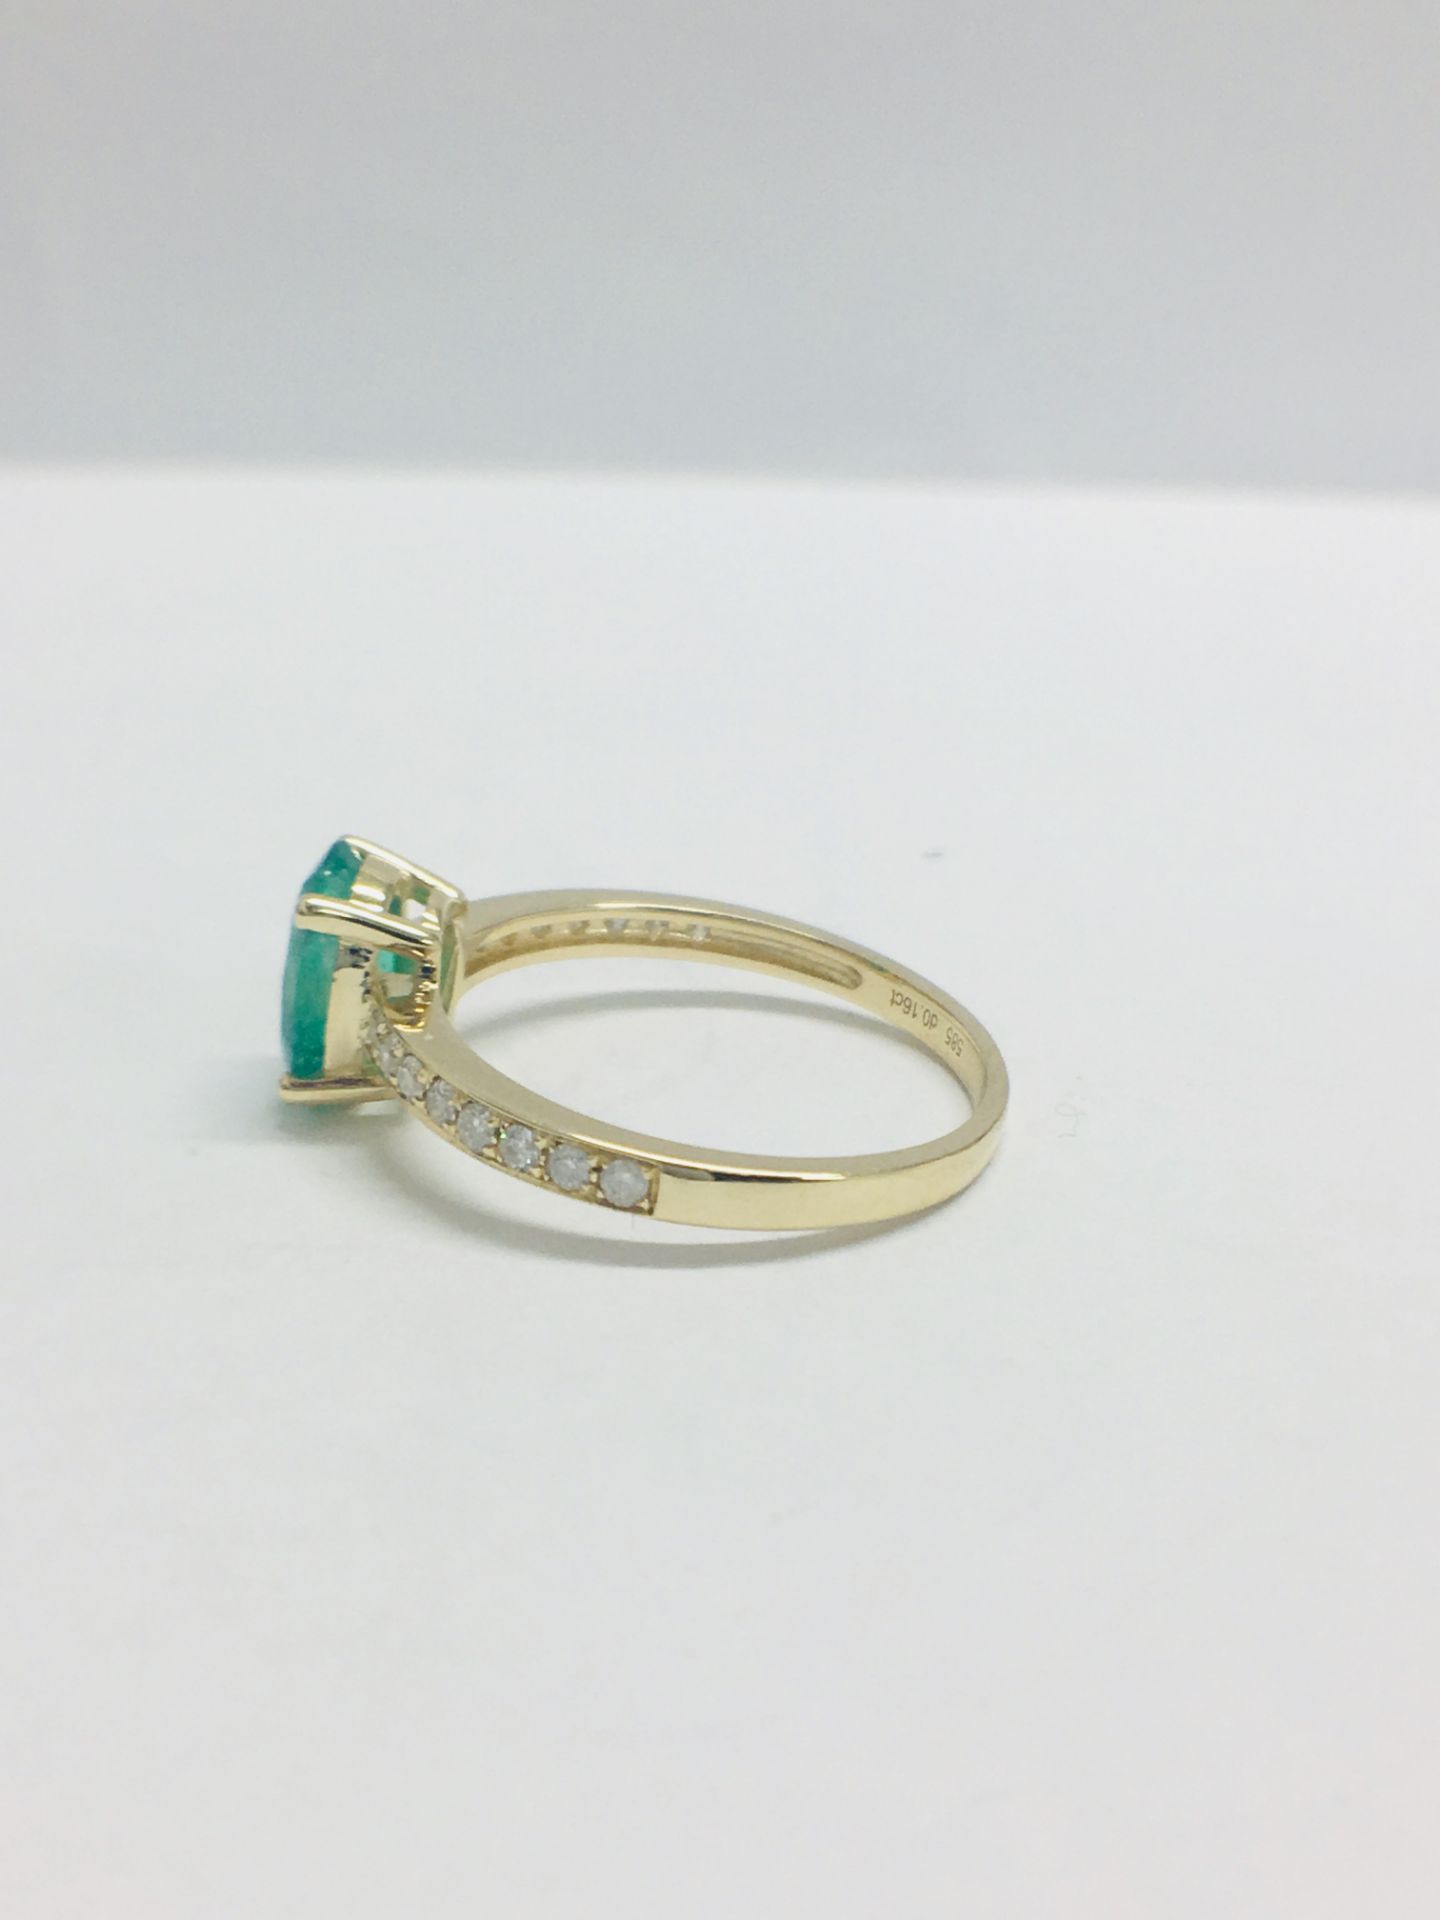 14ct Yellow Gold Emerald and Diamond Ring - Image 7 of 7